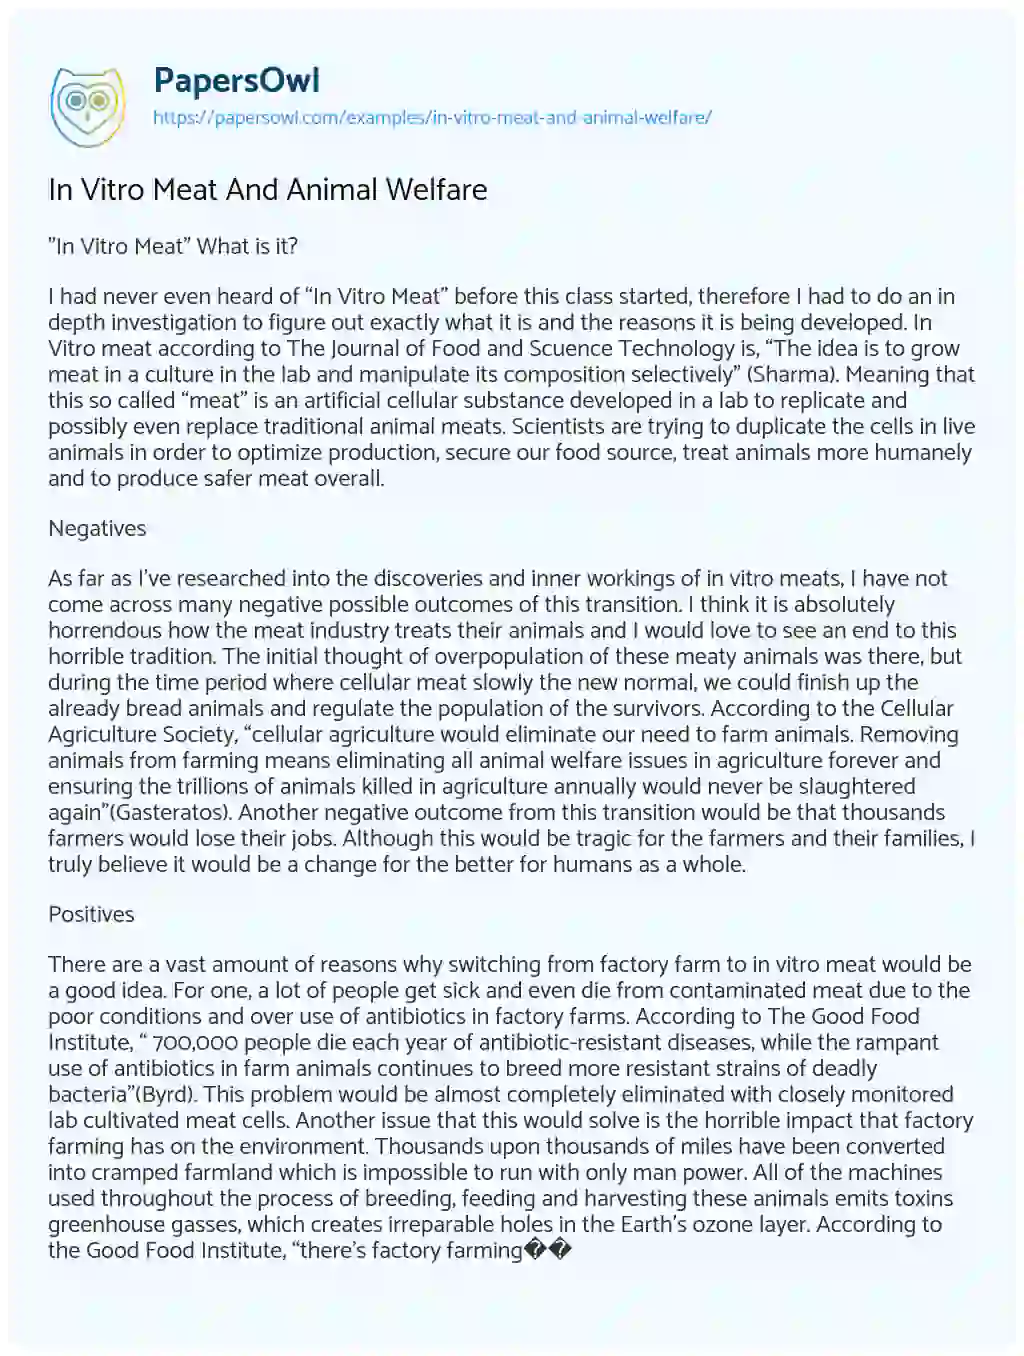 Essay on In Vitro Meat And Animal Welfare